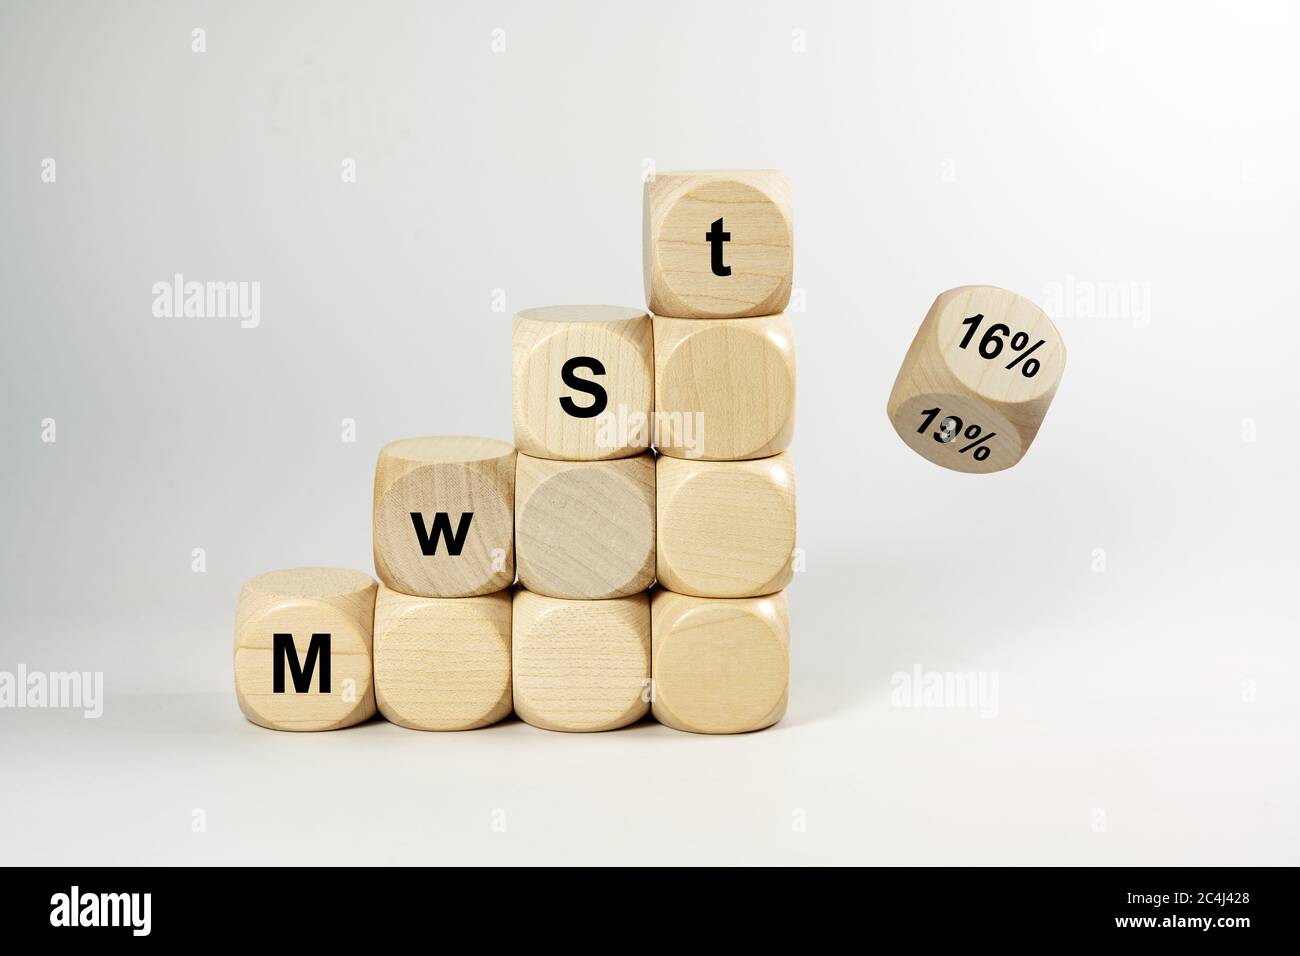 MwSt (value added tax) written on wooden dices, one is falling and turns from 19% to 16%, finance concept, German economic stimulus package after the Stock Photo